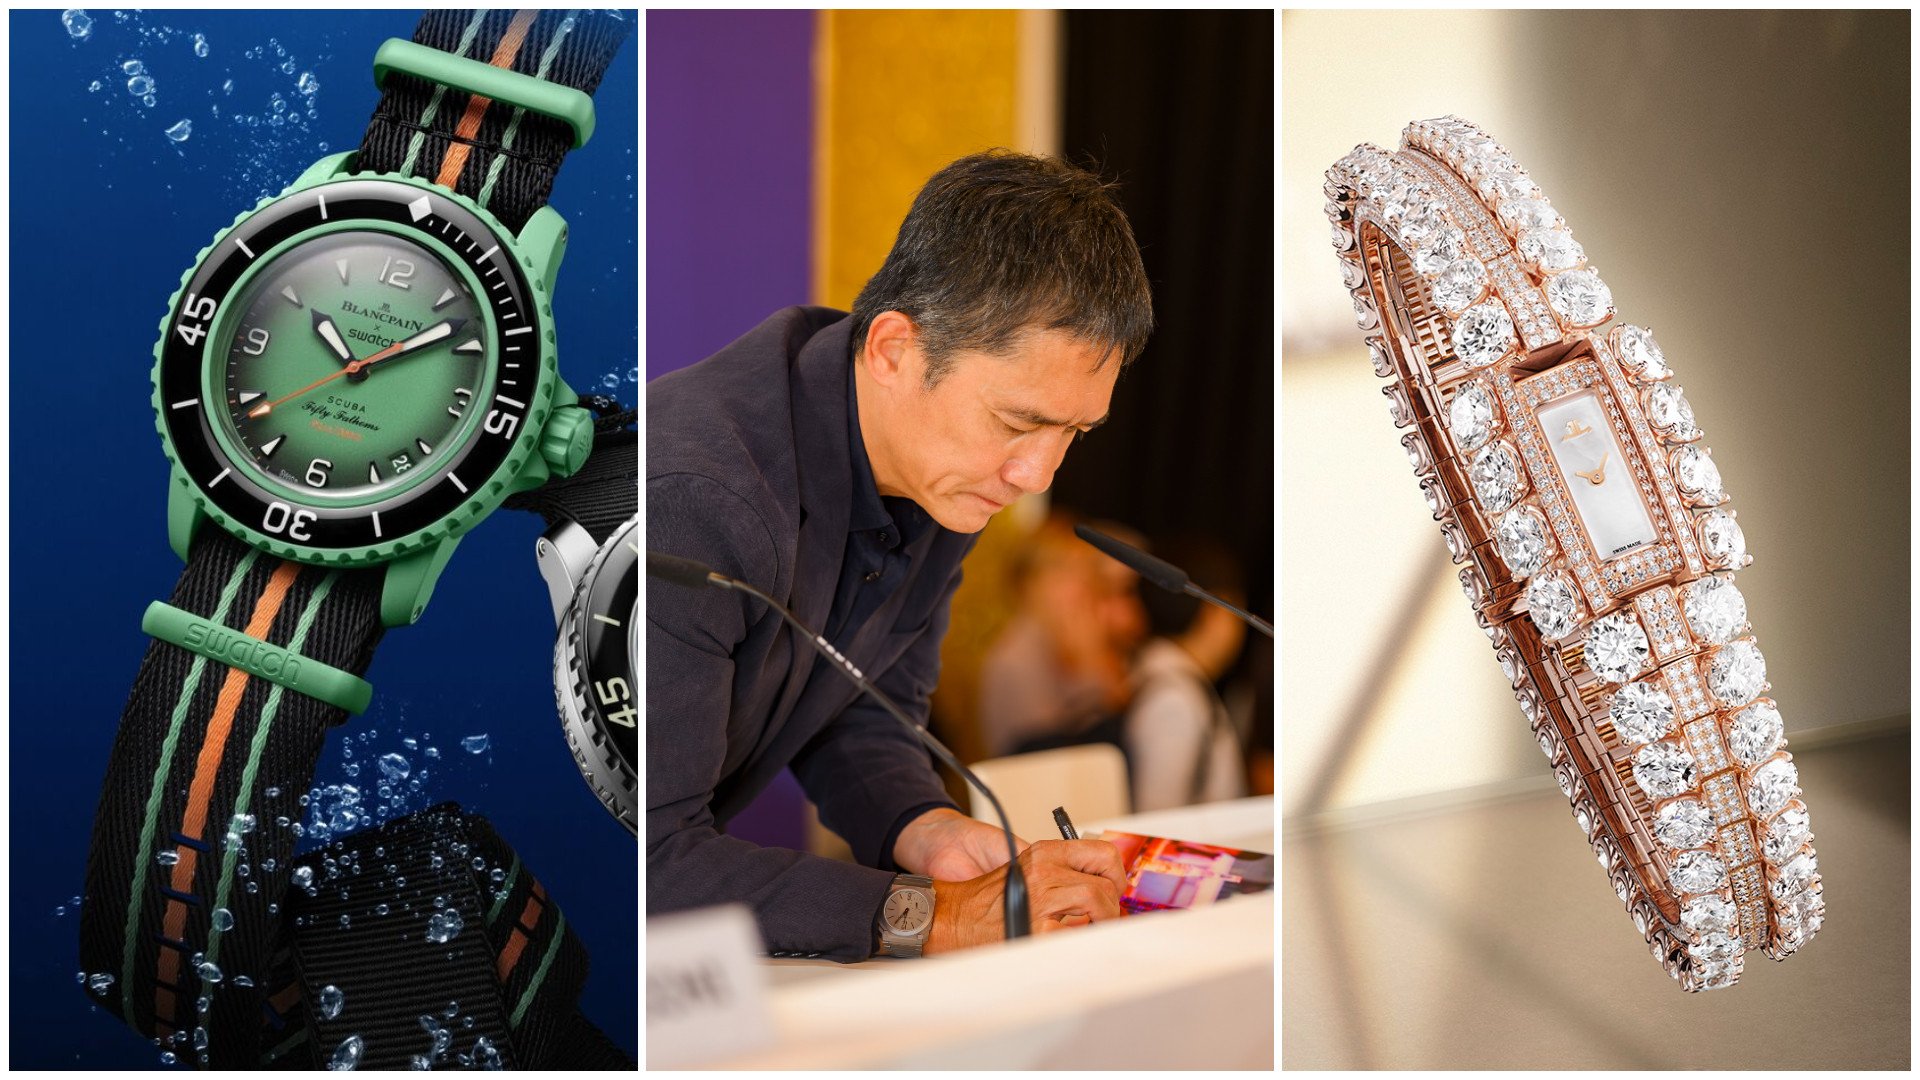 Left to right: Blancpain and Swatch release a bioceramic Fifty Fathoms; Tony Leung wears the Bulgari Octo Finissimo at the 80th Venice Film Festival; Jaeger-LeCoultre adds a new design to the Calibre 101 line. Photos: Handout